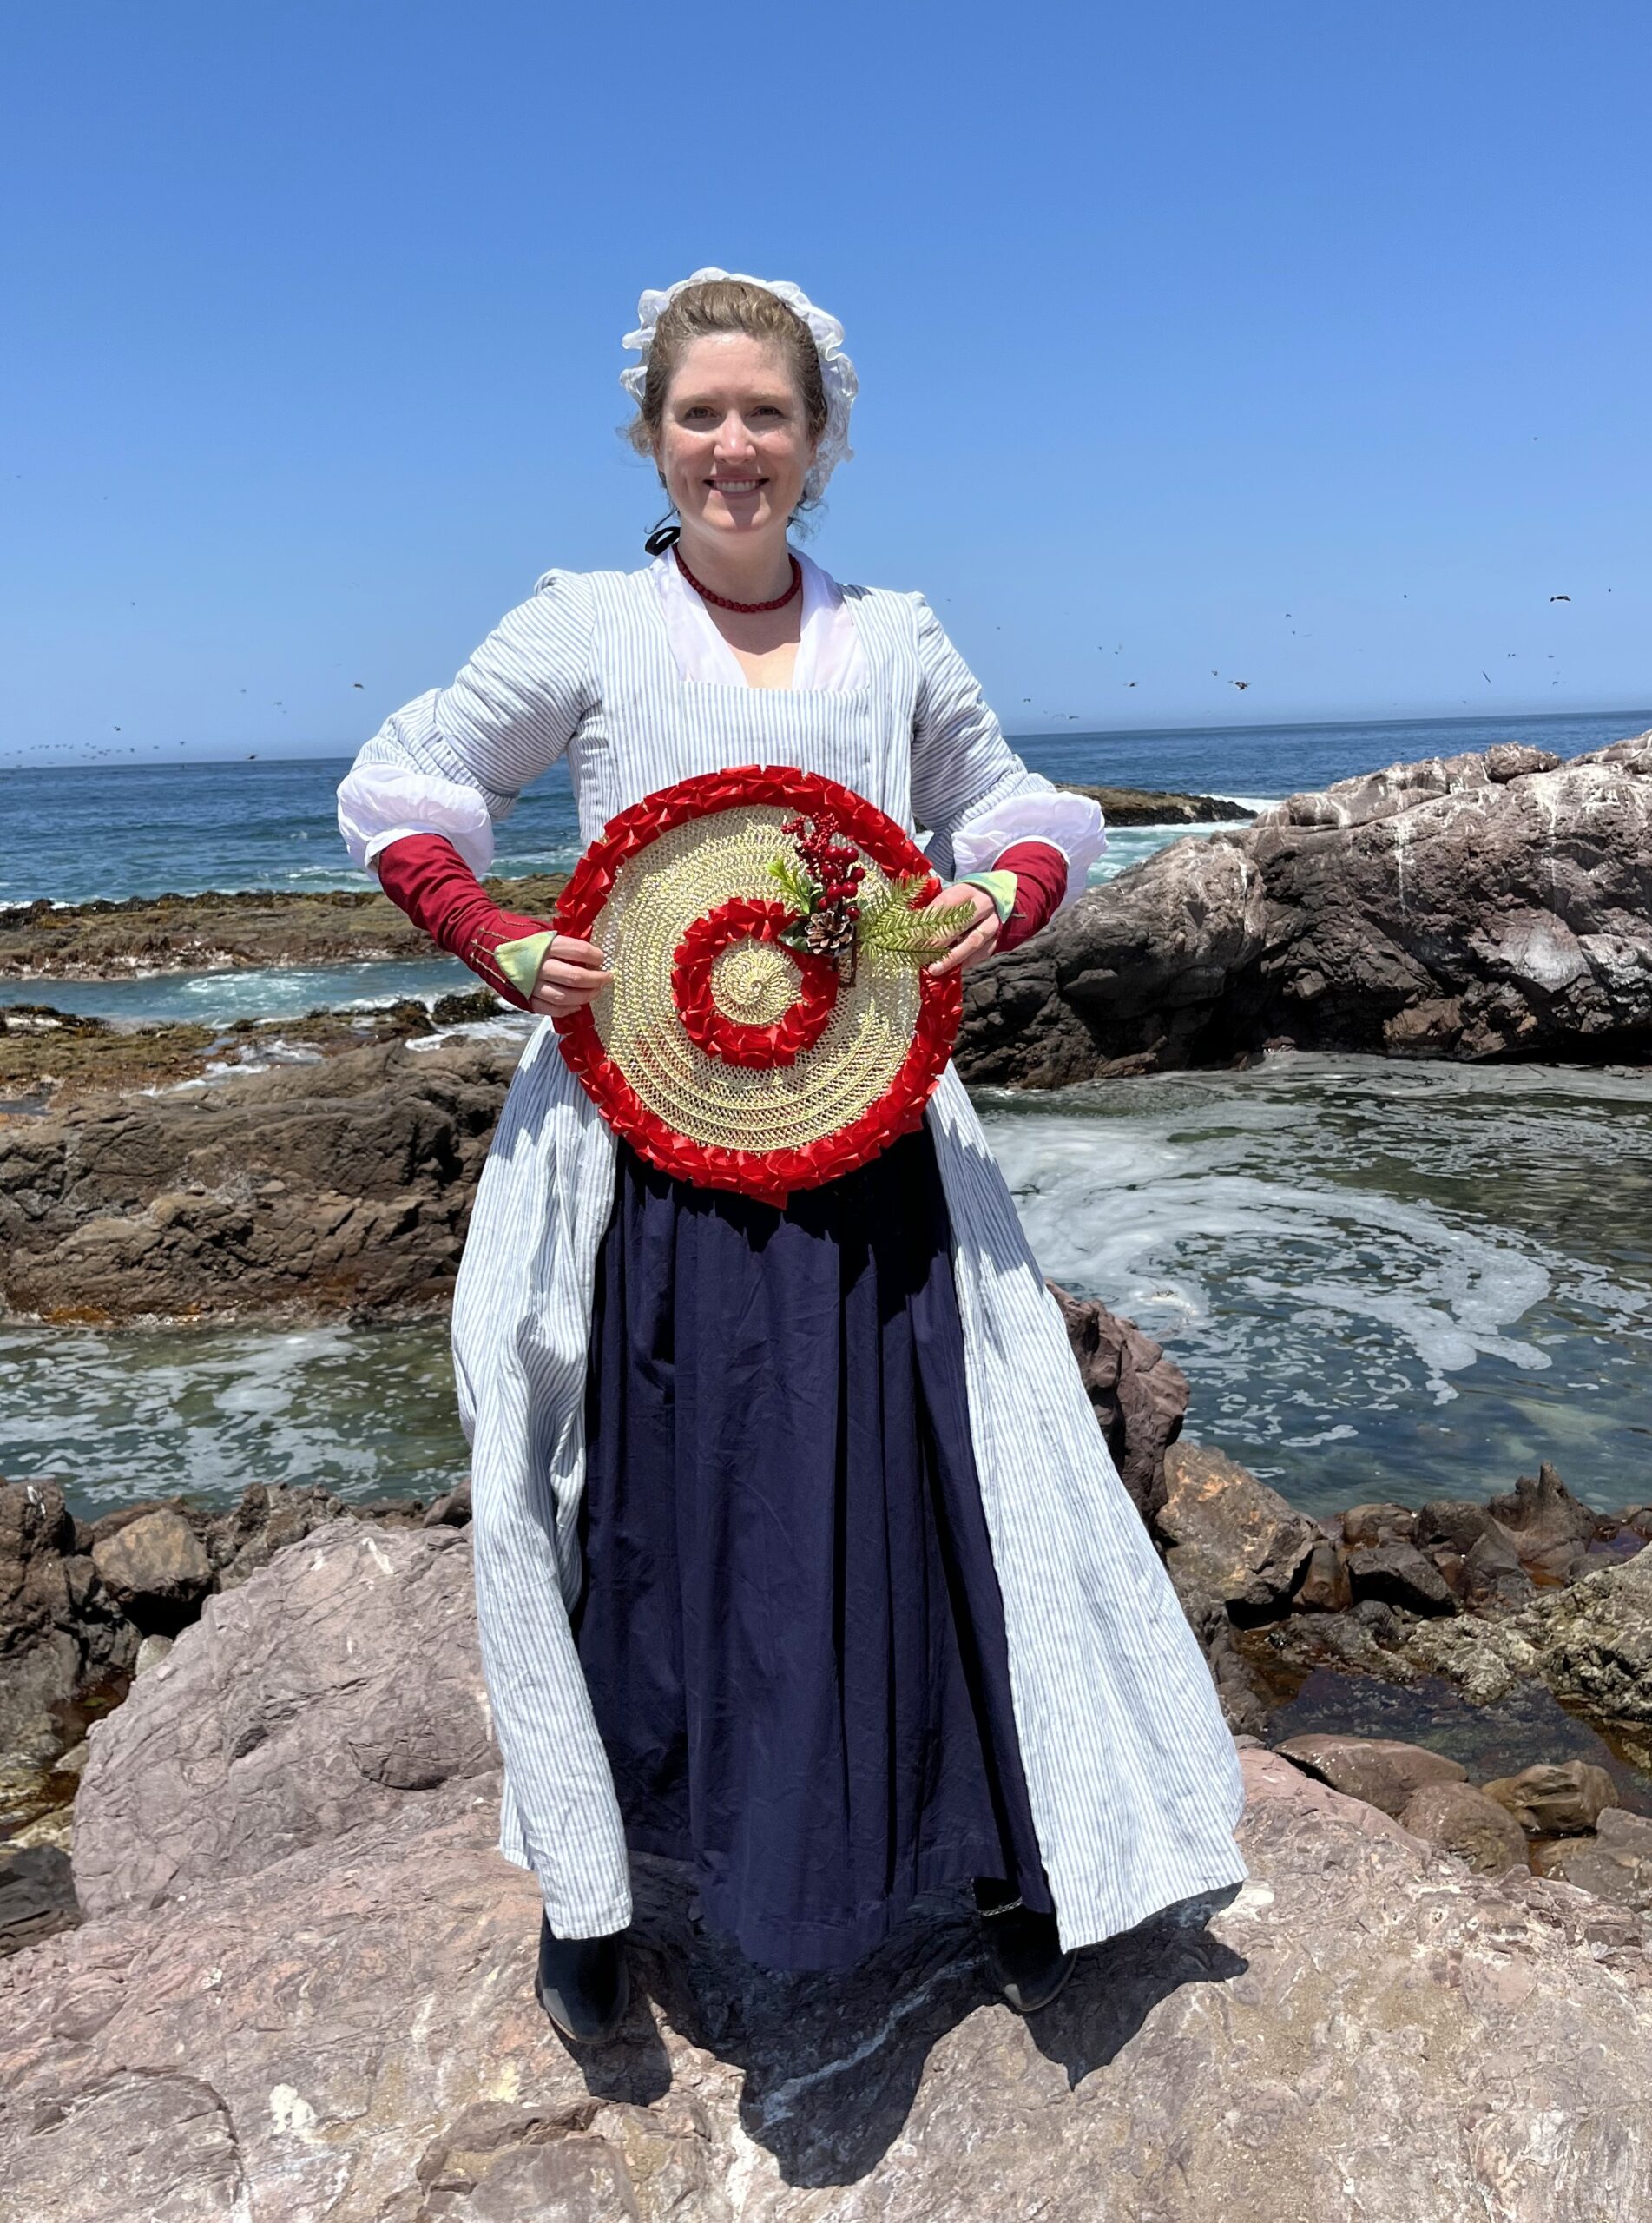 Tabubilgirl stands on a rocky shore. She is wearing a striped linen english nightgown and a blue cotton petticoat. She is holding an 18th Century Bergere Hat decorated for Christmas